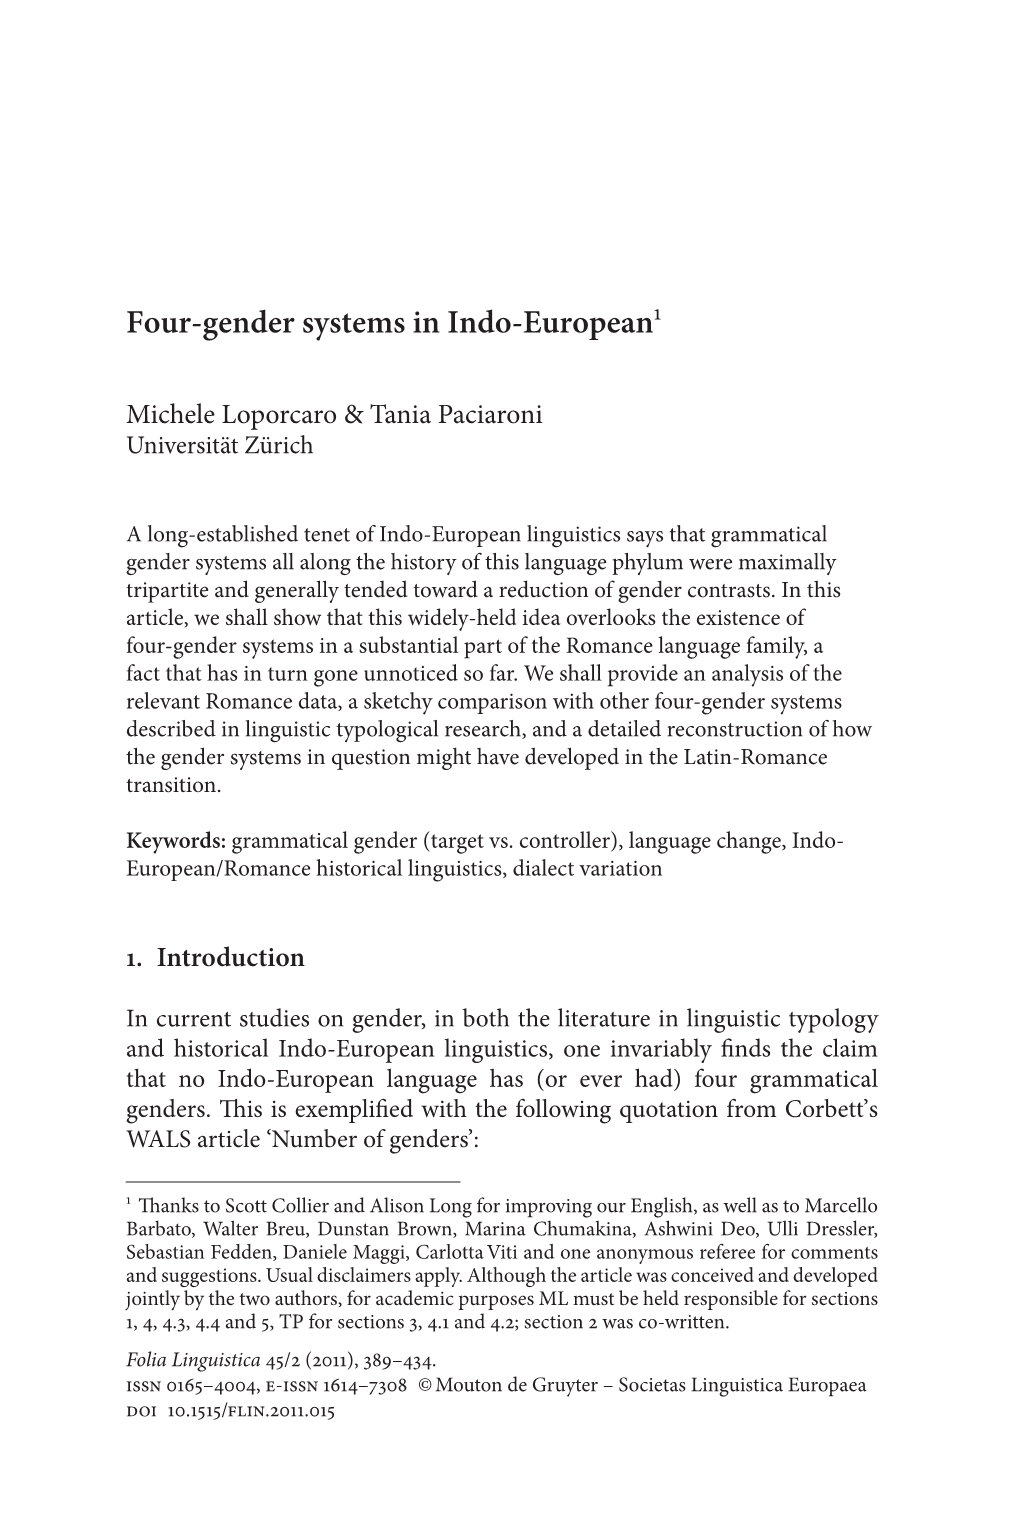 Four-Gender Systems in Indo-European1